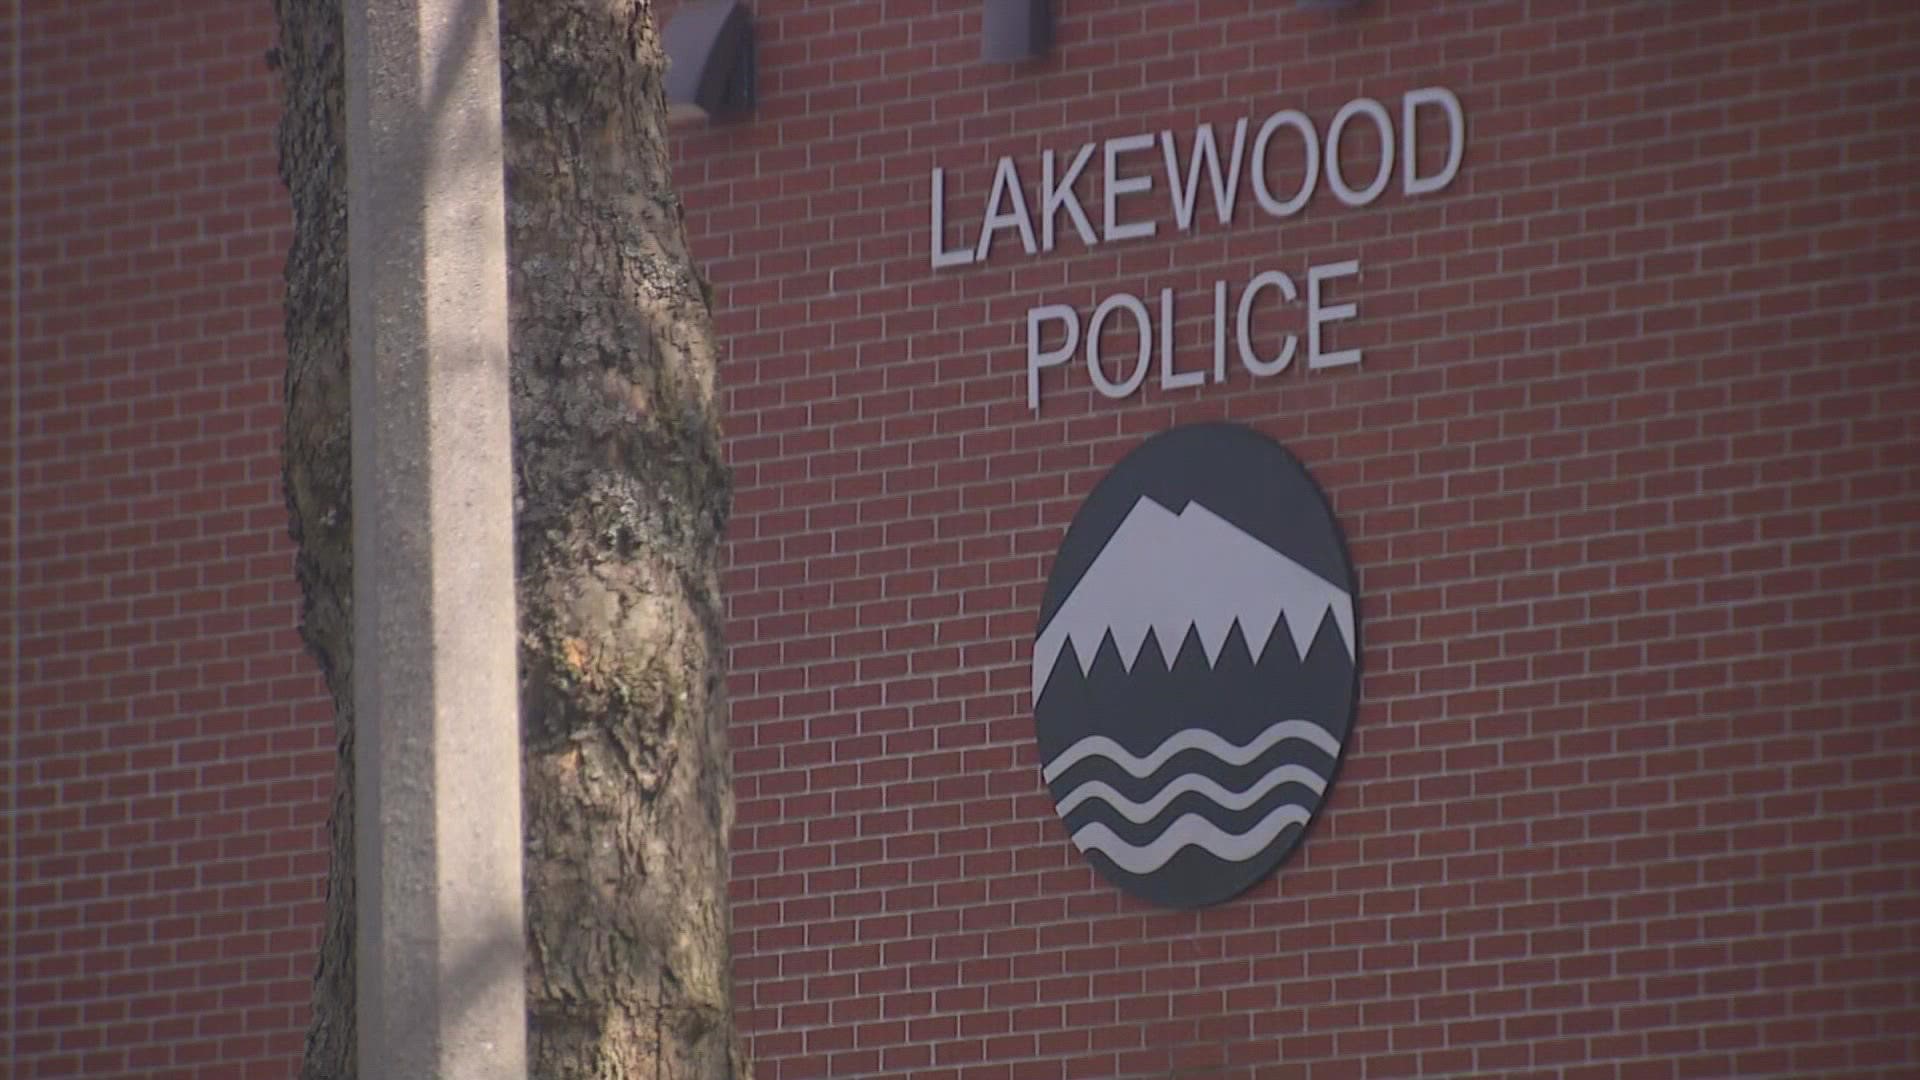 The crime trend in Lakewood mirrors what other law enforcement agencies are reporting across the region.